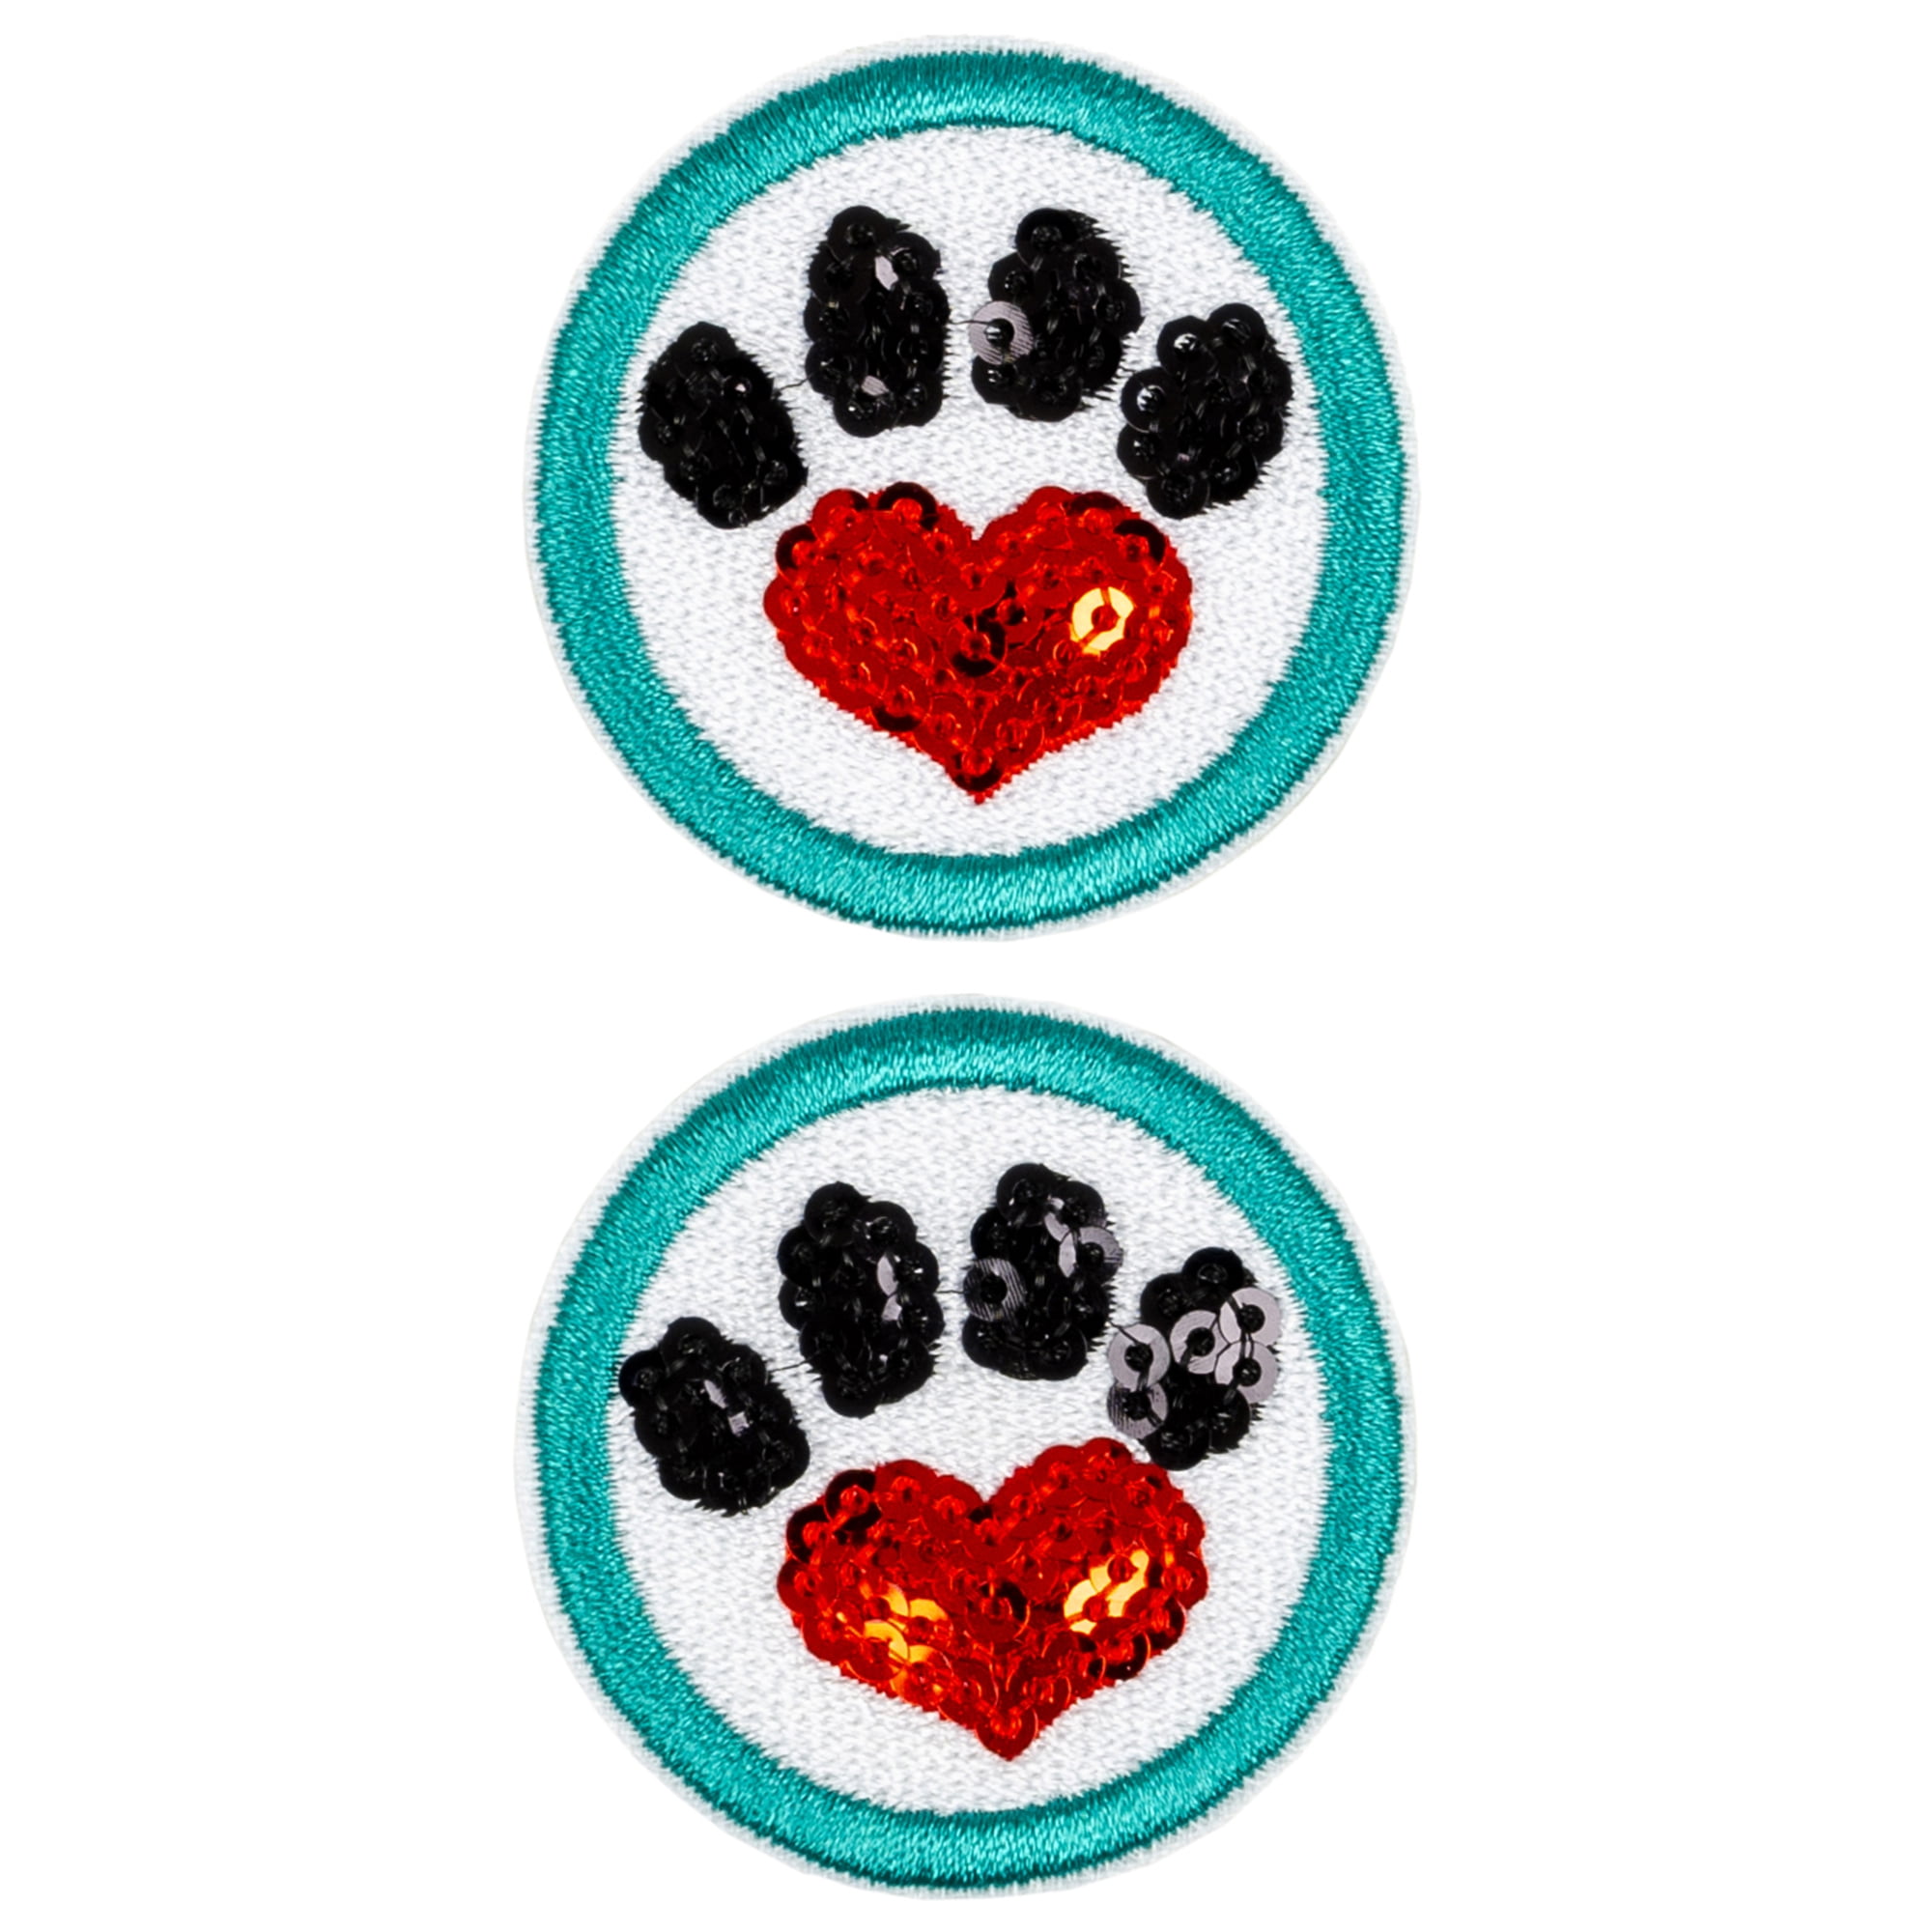 Dog Rosettes Paw Print Design x 5 Per Pack 1st place FREE POSTAGE 